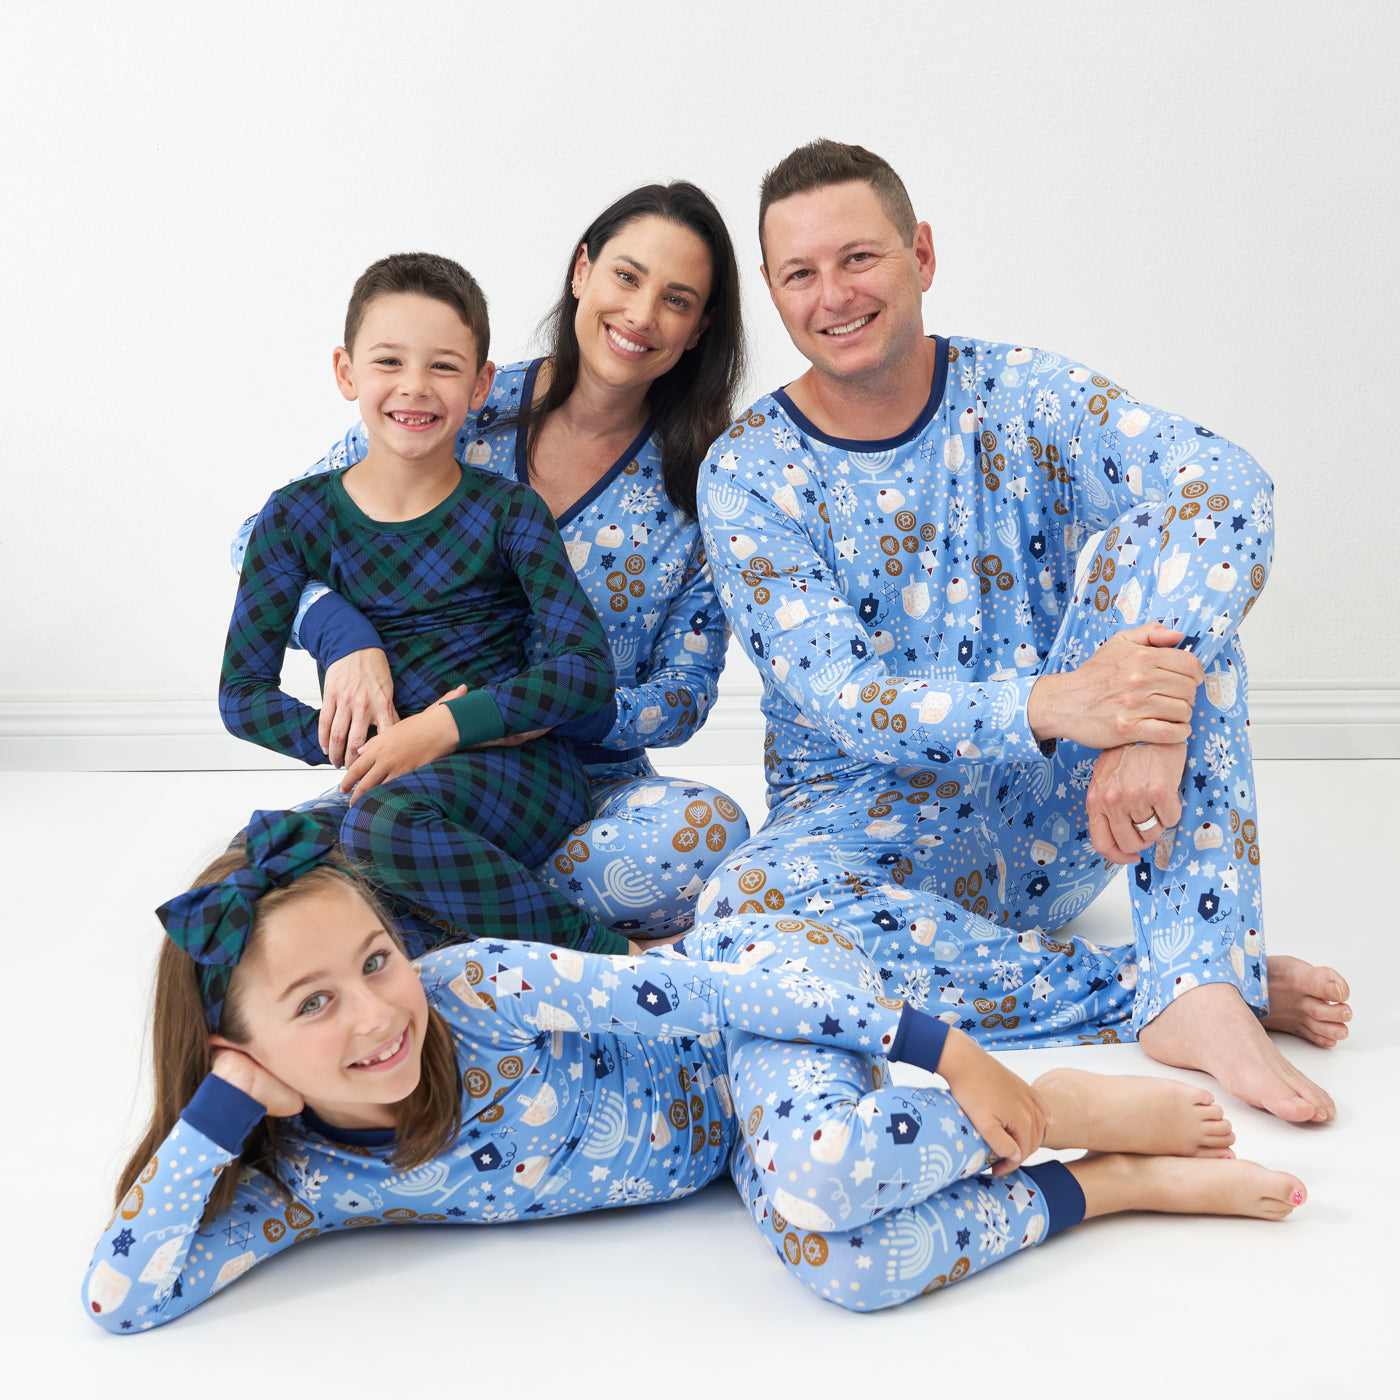 Family of four posing together. Mom is wearing Hanukkah Lights and Love women's pajama top and matching women's pajama bottoms. Dad is wearing Hanukkah Lights and Love men's pajama top and matching men's pajama bottoms. Their daughter is wearing a Hanukkah Lights and Love two piece pajama set paired with an Emerald Plaid luxe bow headband. Their son is coordinating wearing Emerald Plaid two piece pajama set